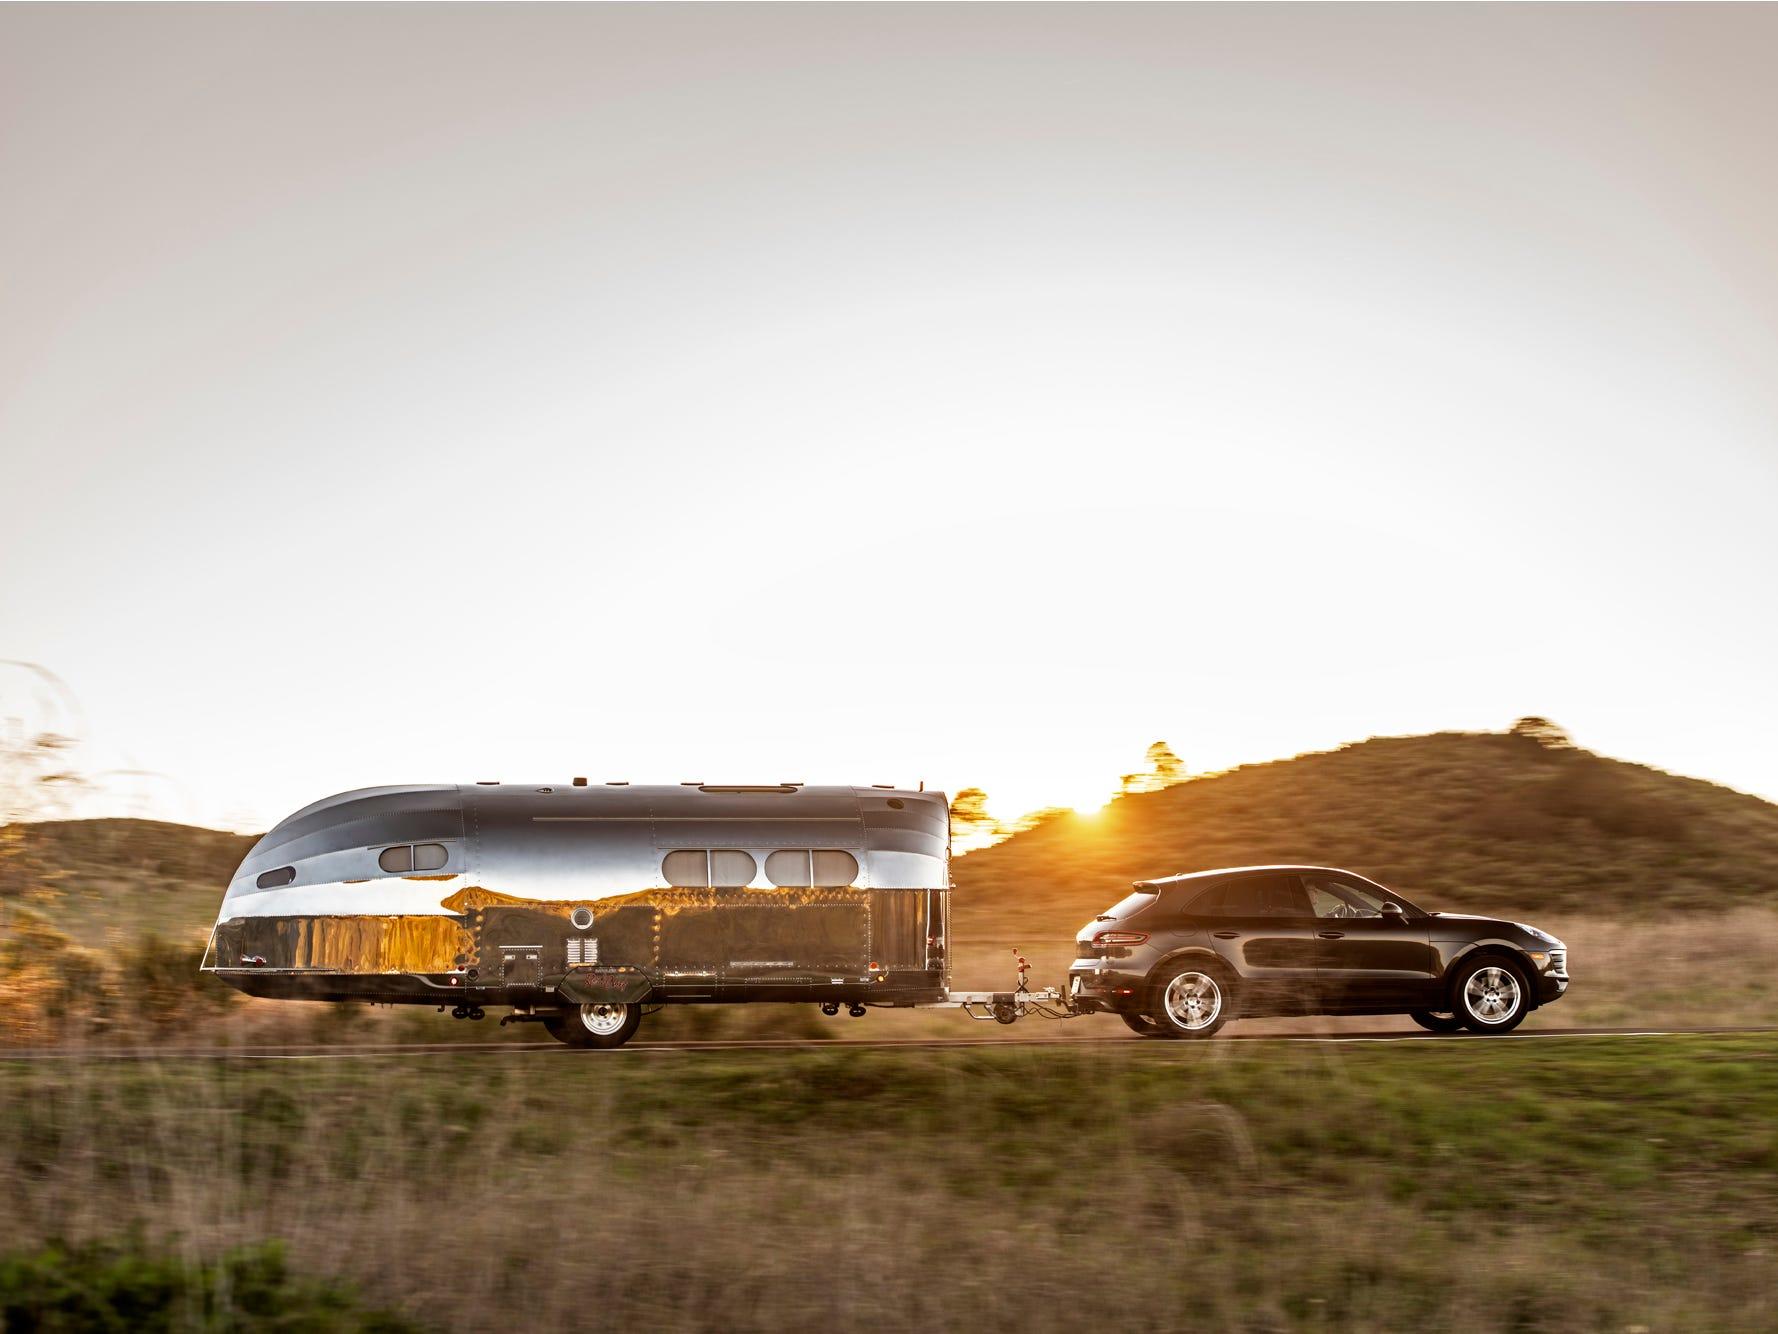 This $225,000 luxury RV can travel across the country on a ...